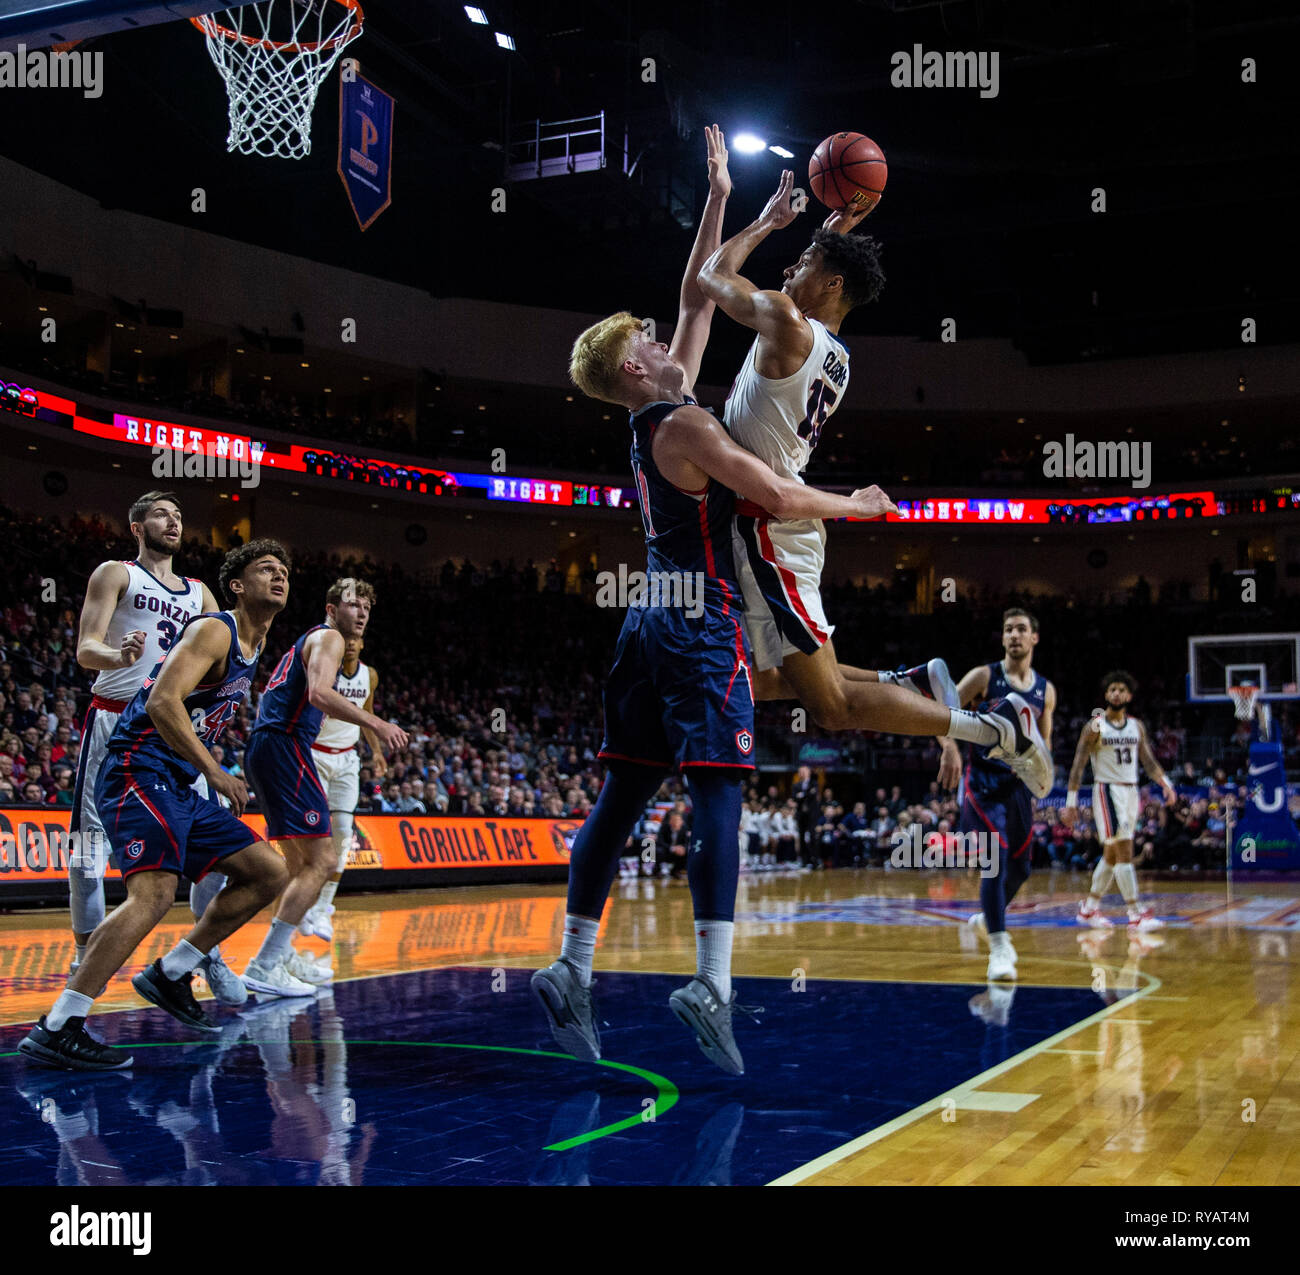 Mar 12 2019 Las Vegas, NV, U.S.A. Gonzaga forward Brandon Clarke (15) drives to the basket during the NCAA West Coast Conference Men's Basketball Tournament championship between the Gonzaga Bulldogs and the Saint Mary's Gaels 47-60 lost at Orleans Arena Las Vegas, NV. Thurman James/CSM Stock Photo